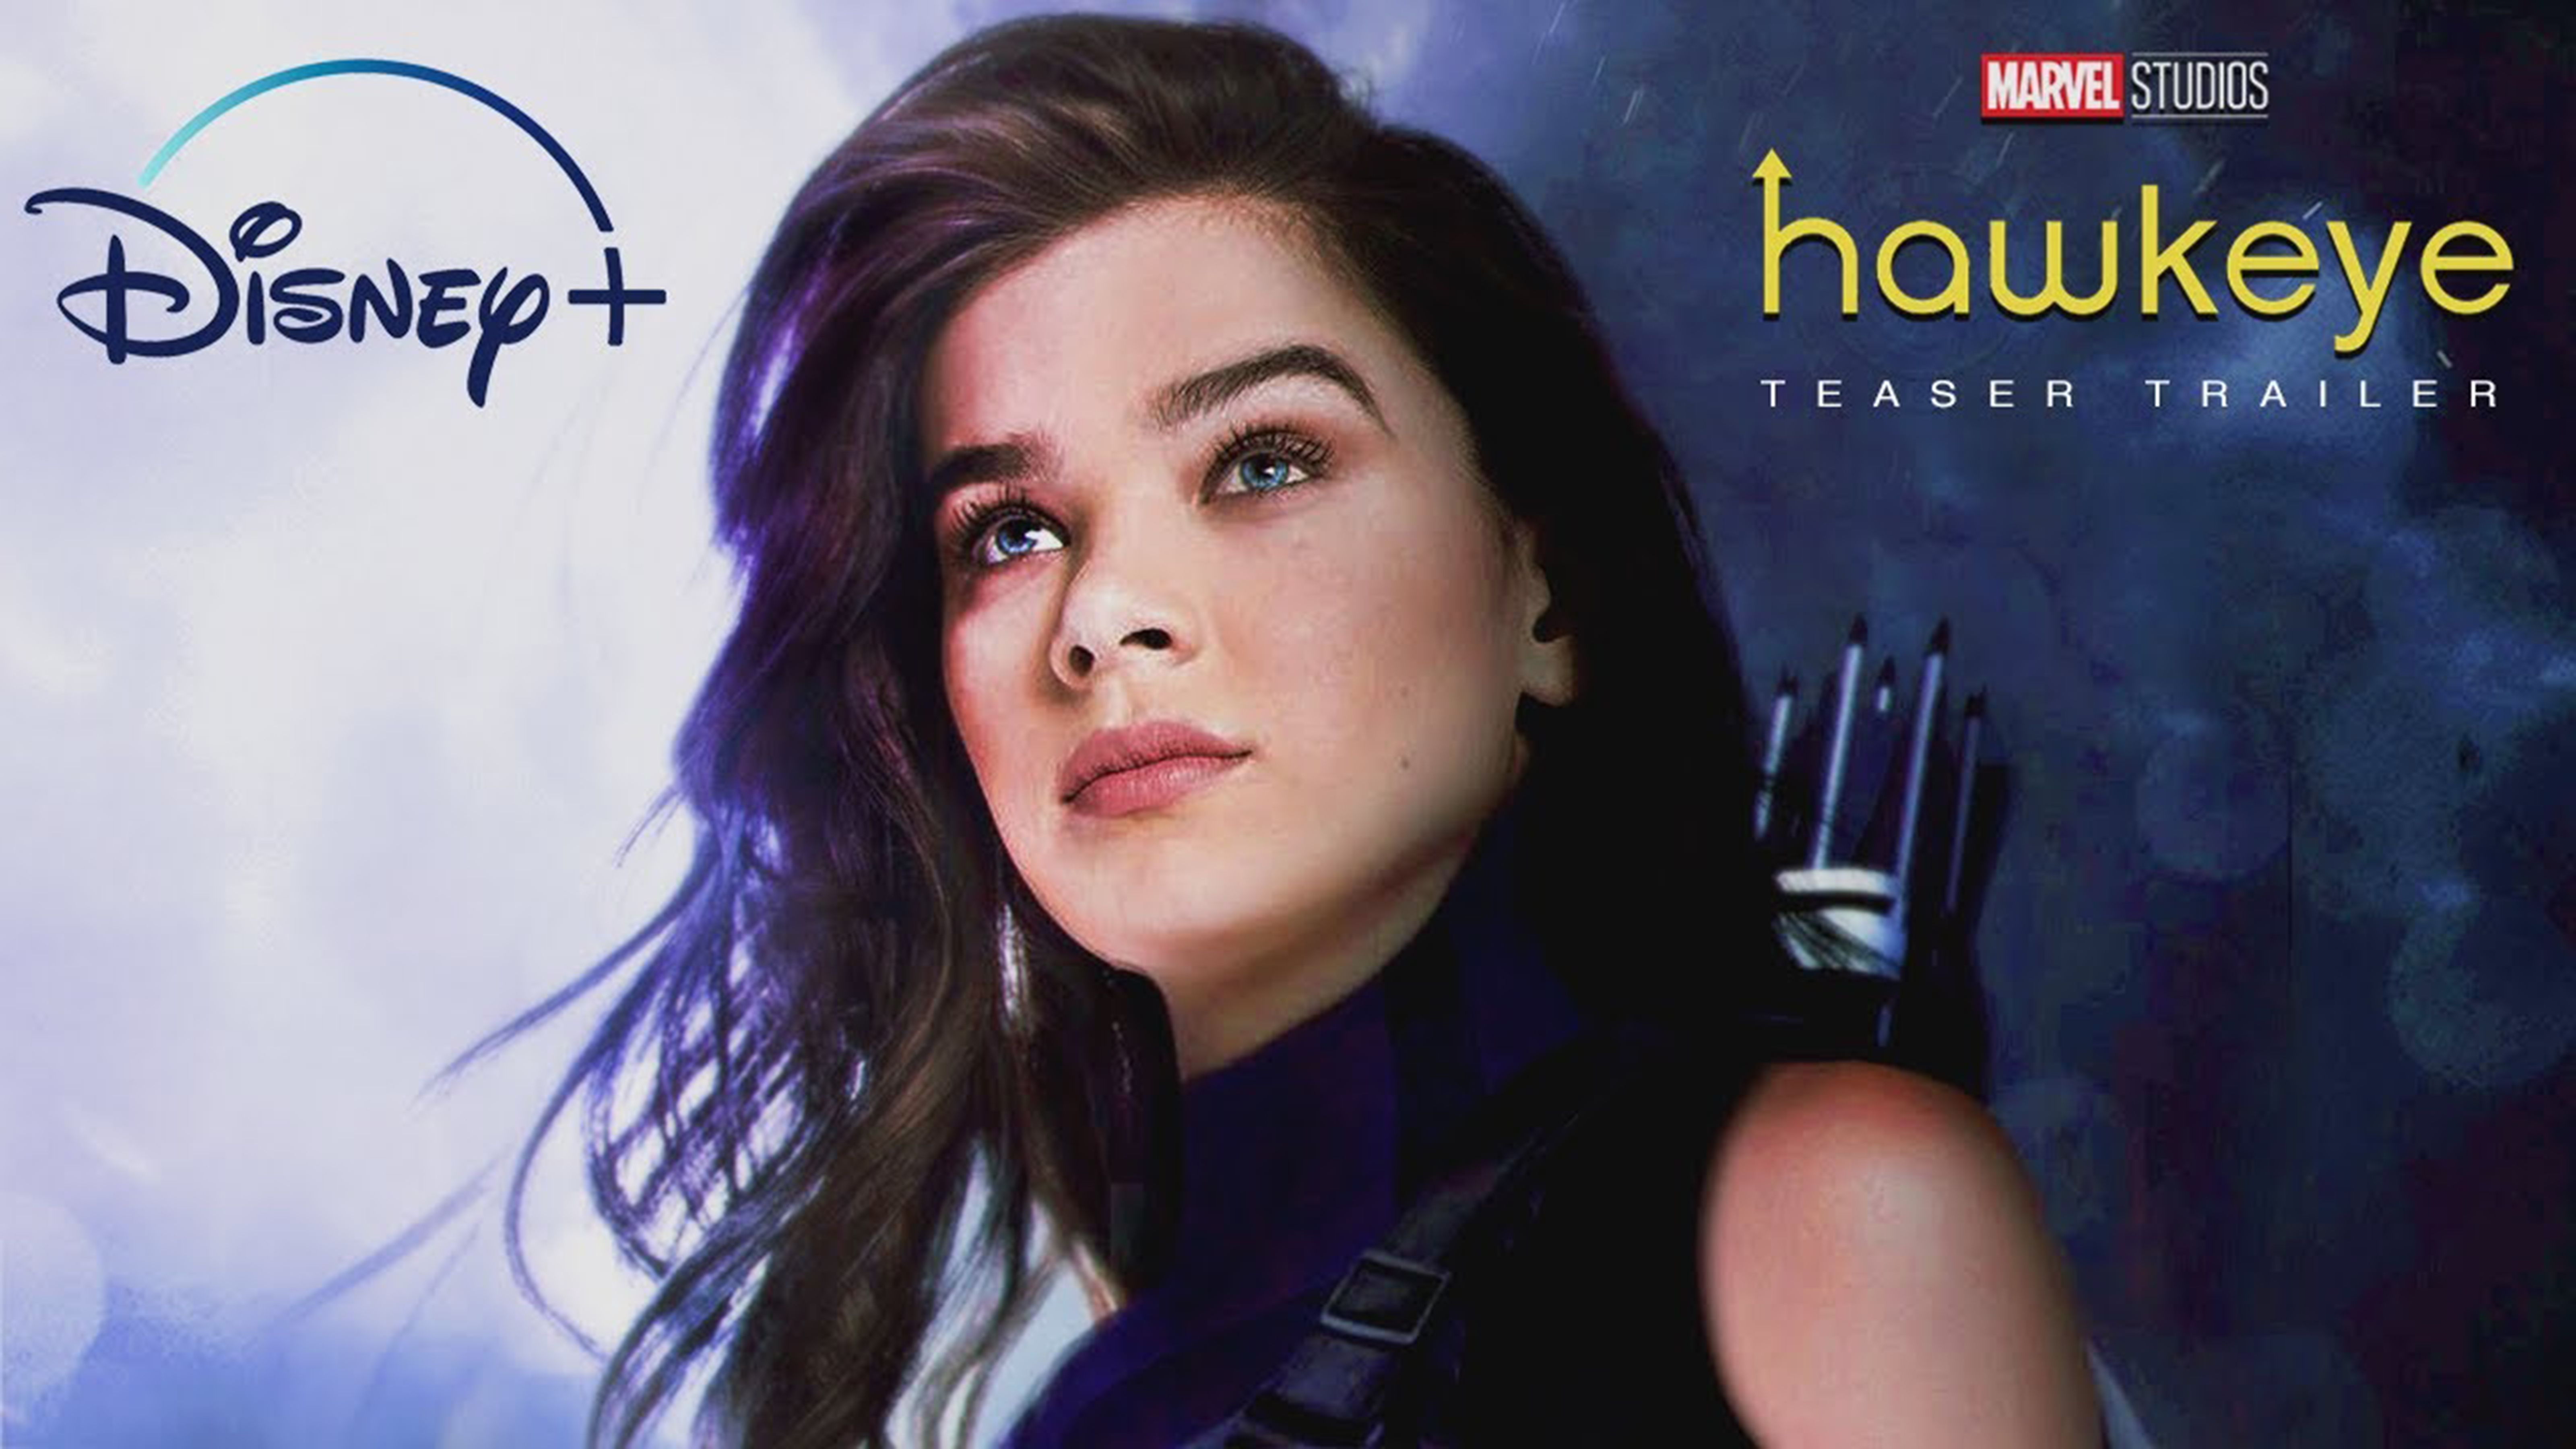 Disney+ gives fans first glimpse of new ‘Hawkeye’ series photo from Youtube